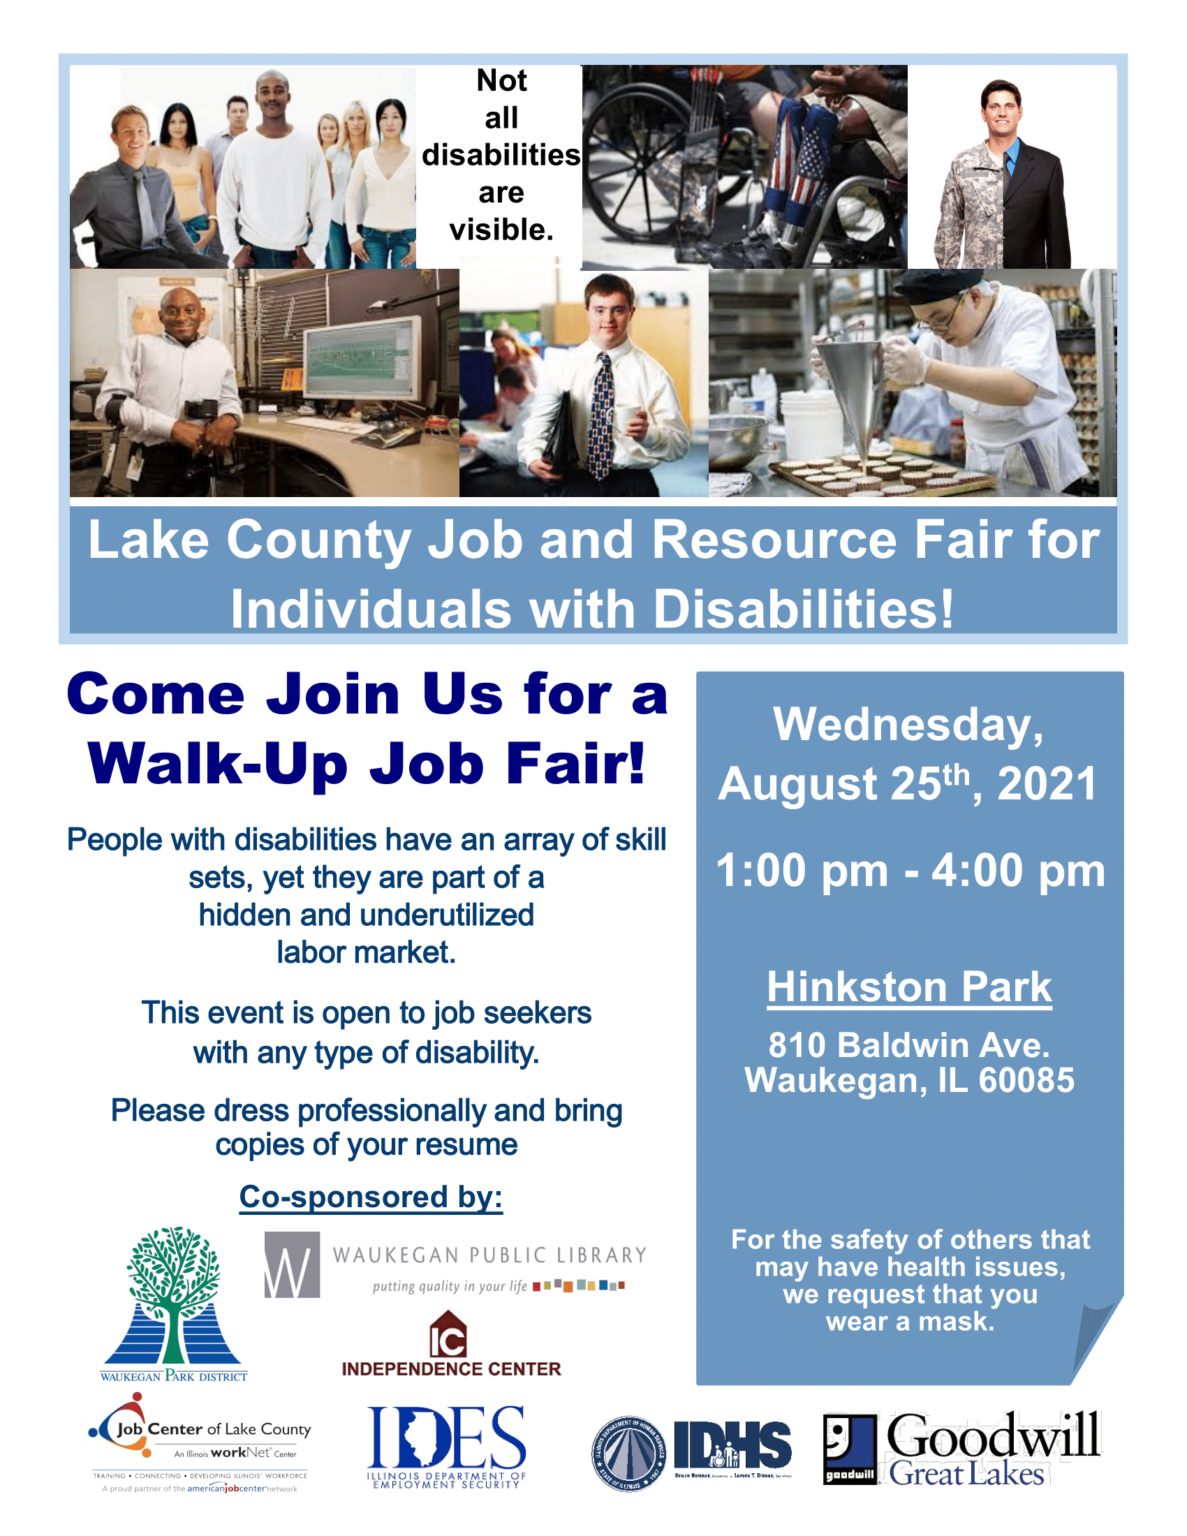 Lake County Job and Resource Fair for Individuals with Disabilities